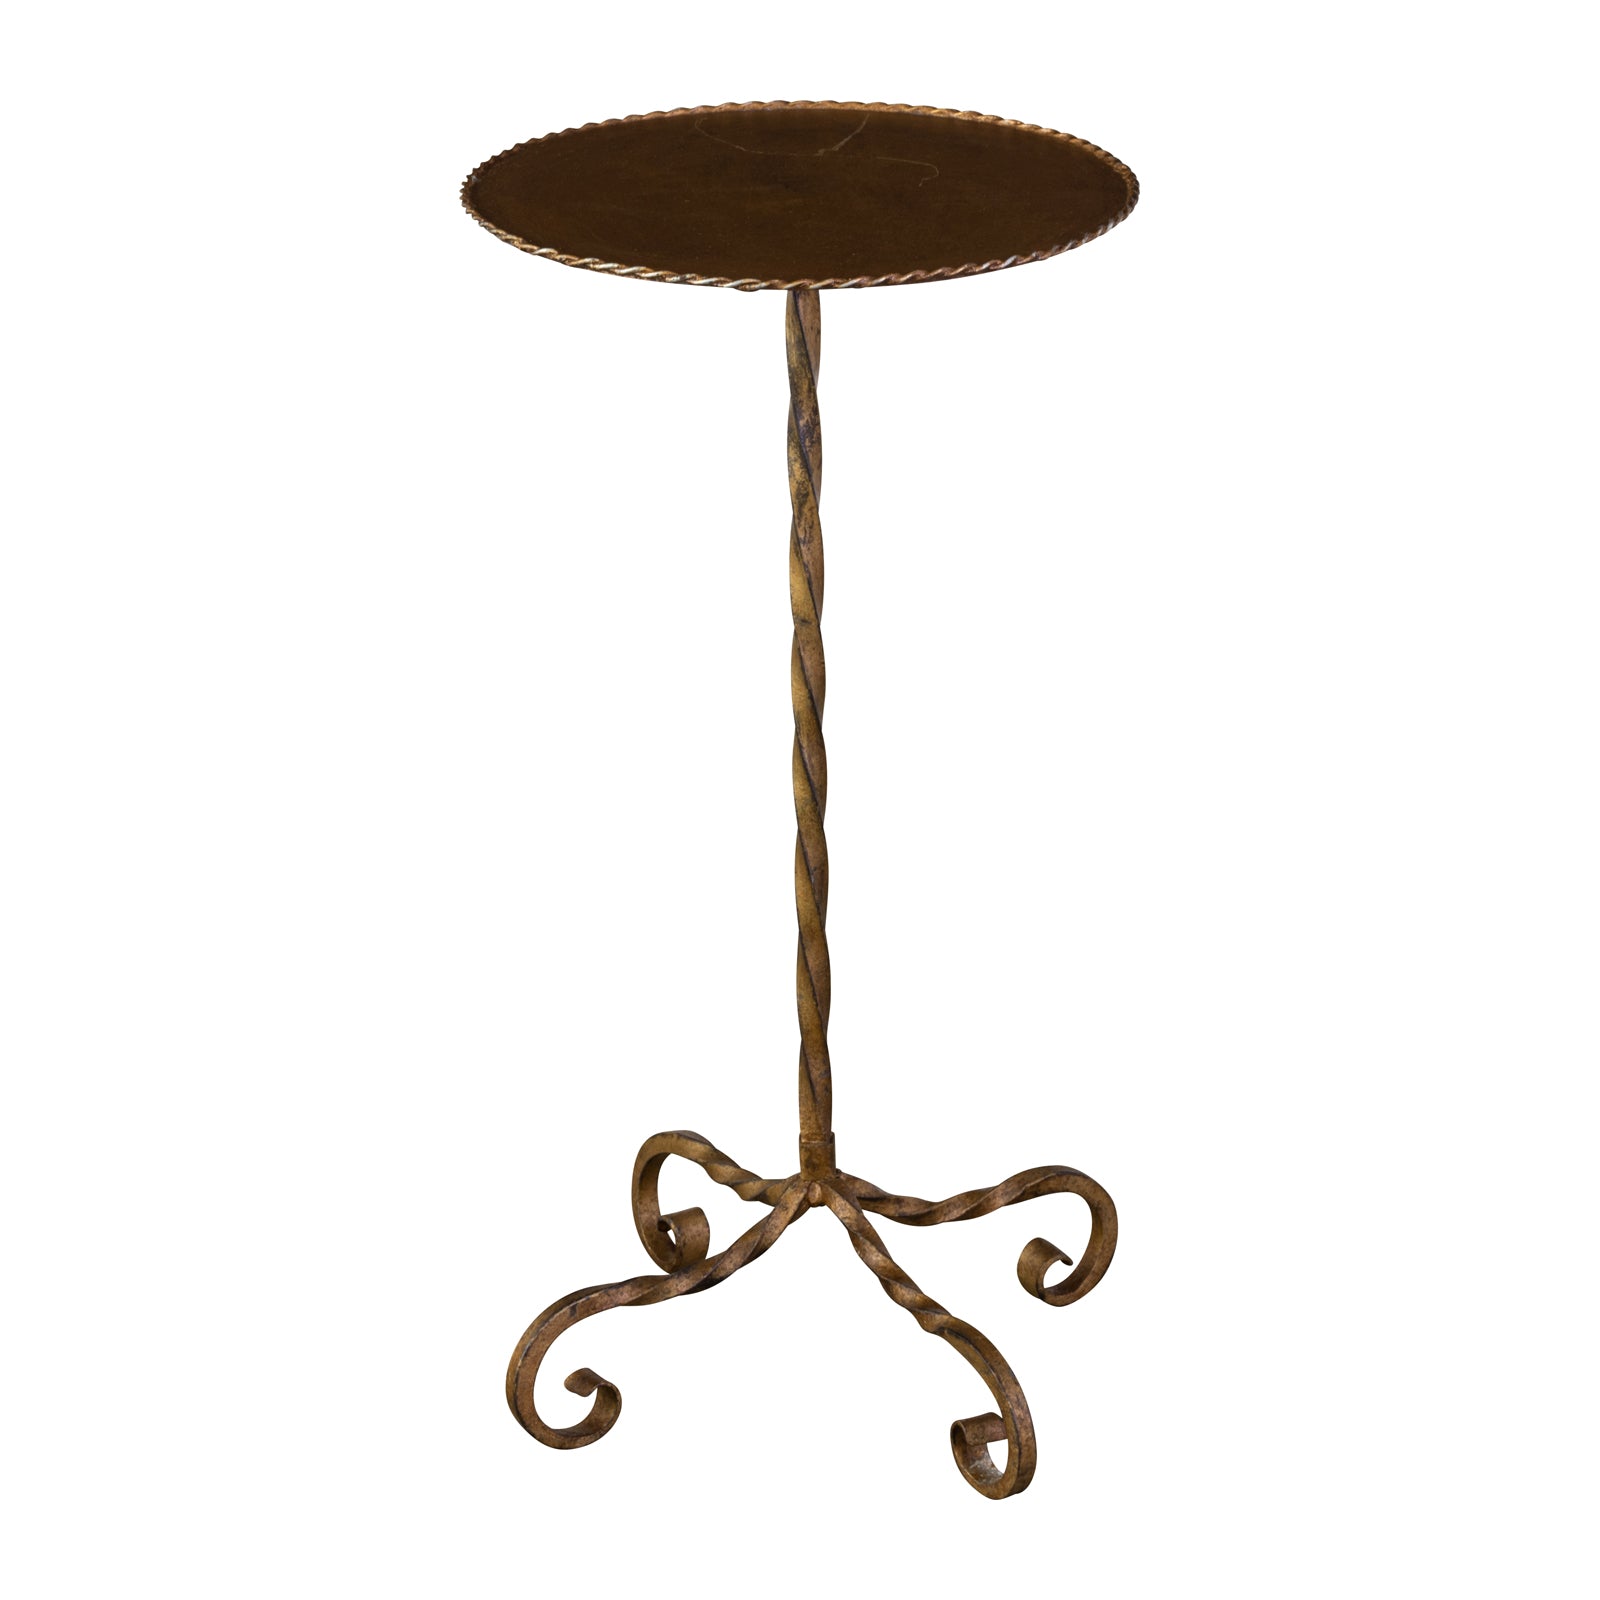 Spanish Martini Table with Twisted Iron Base on Four Legs